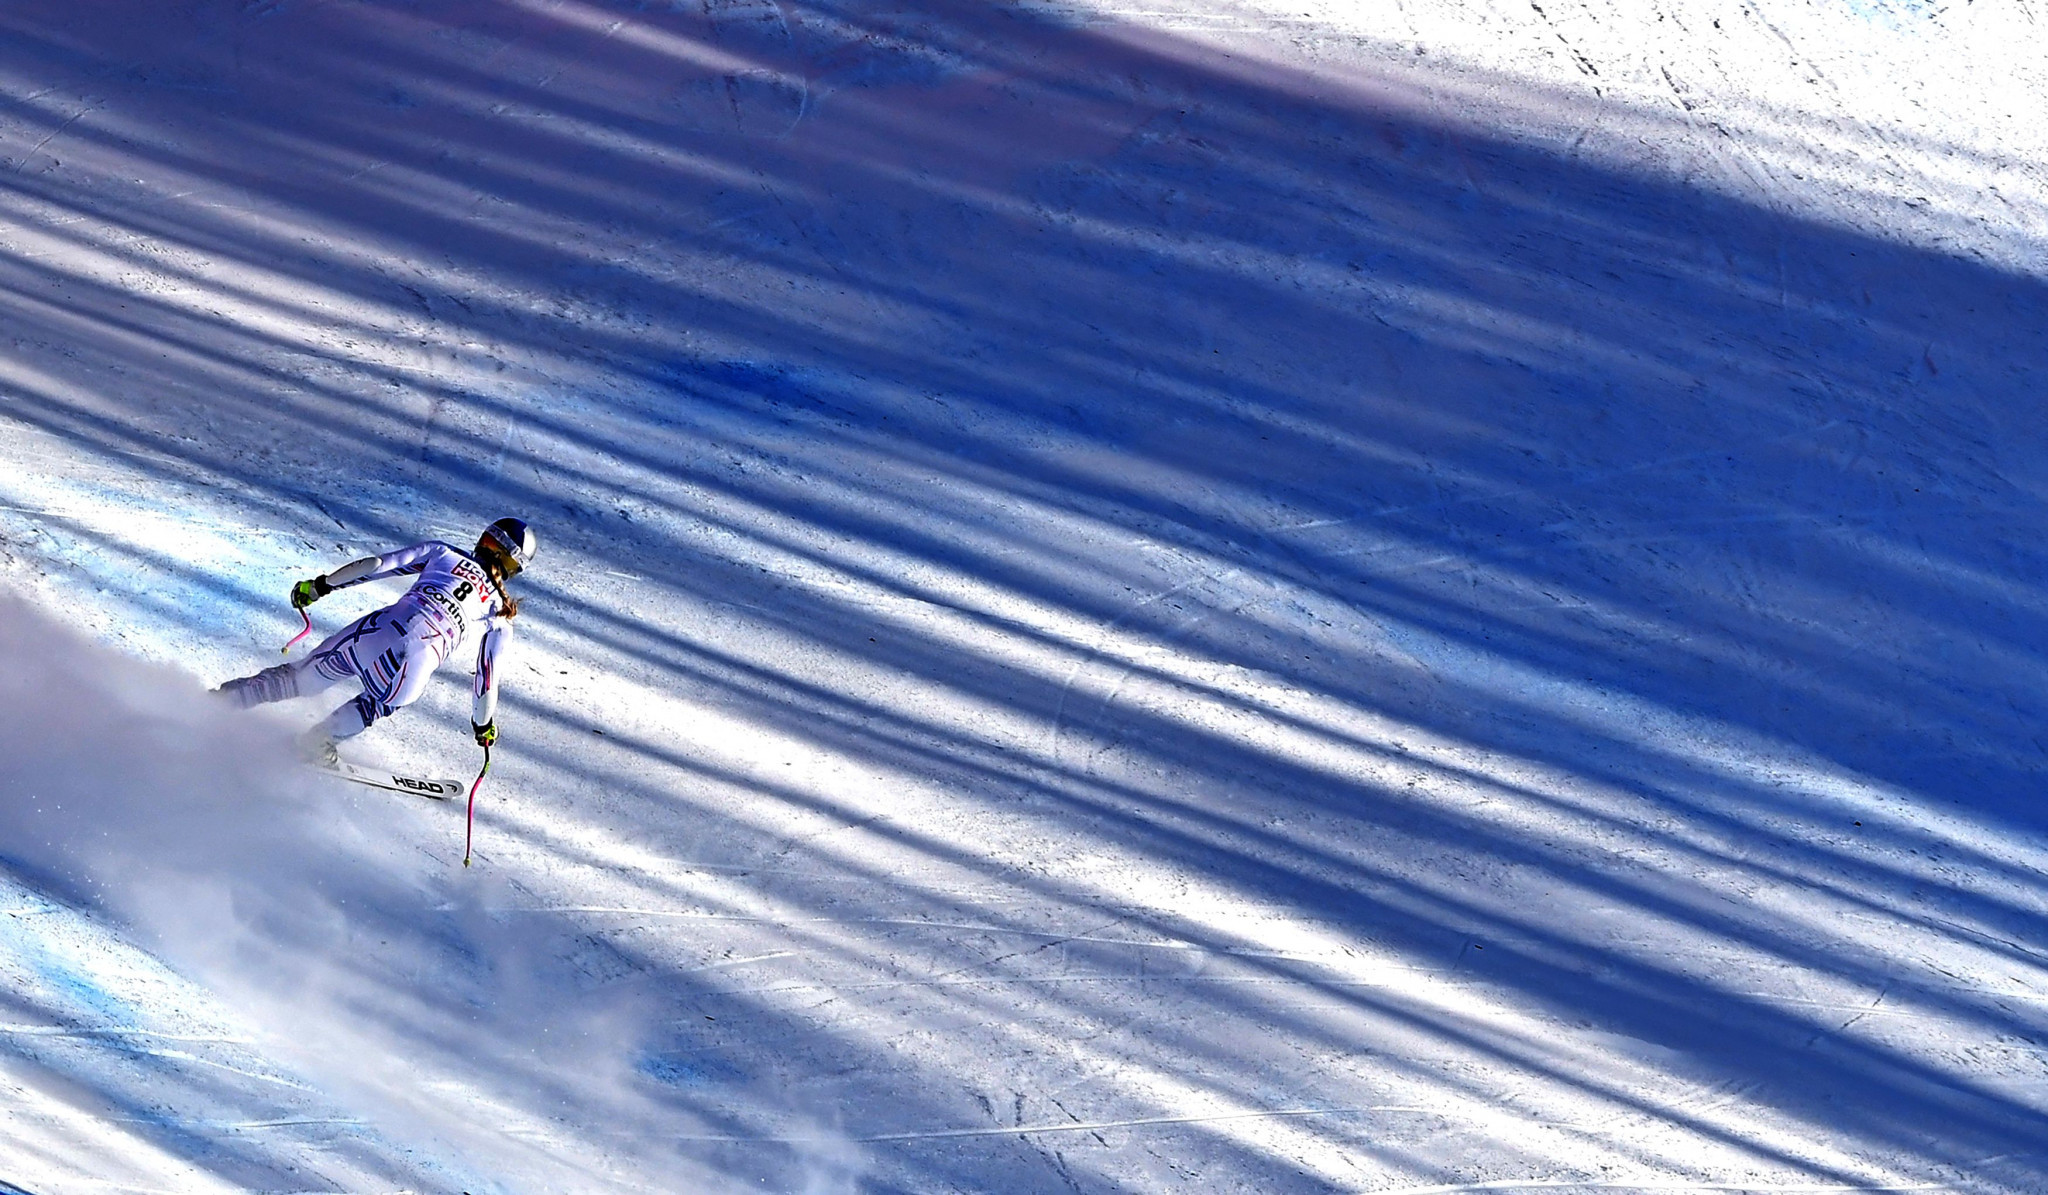 Cortina will host the World Cup Finals in March ©Getty Images